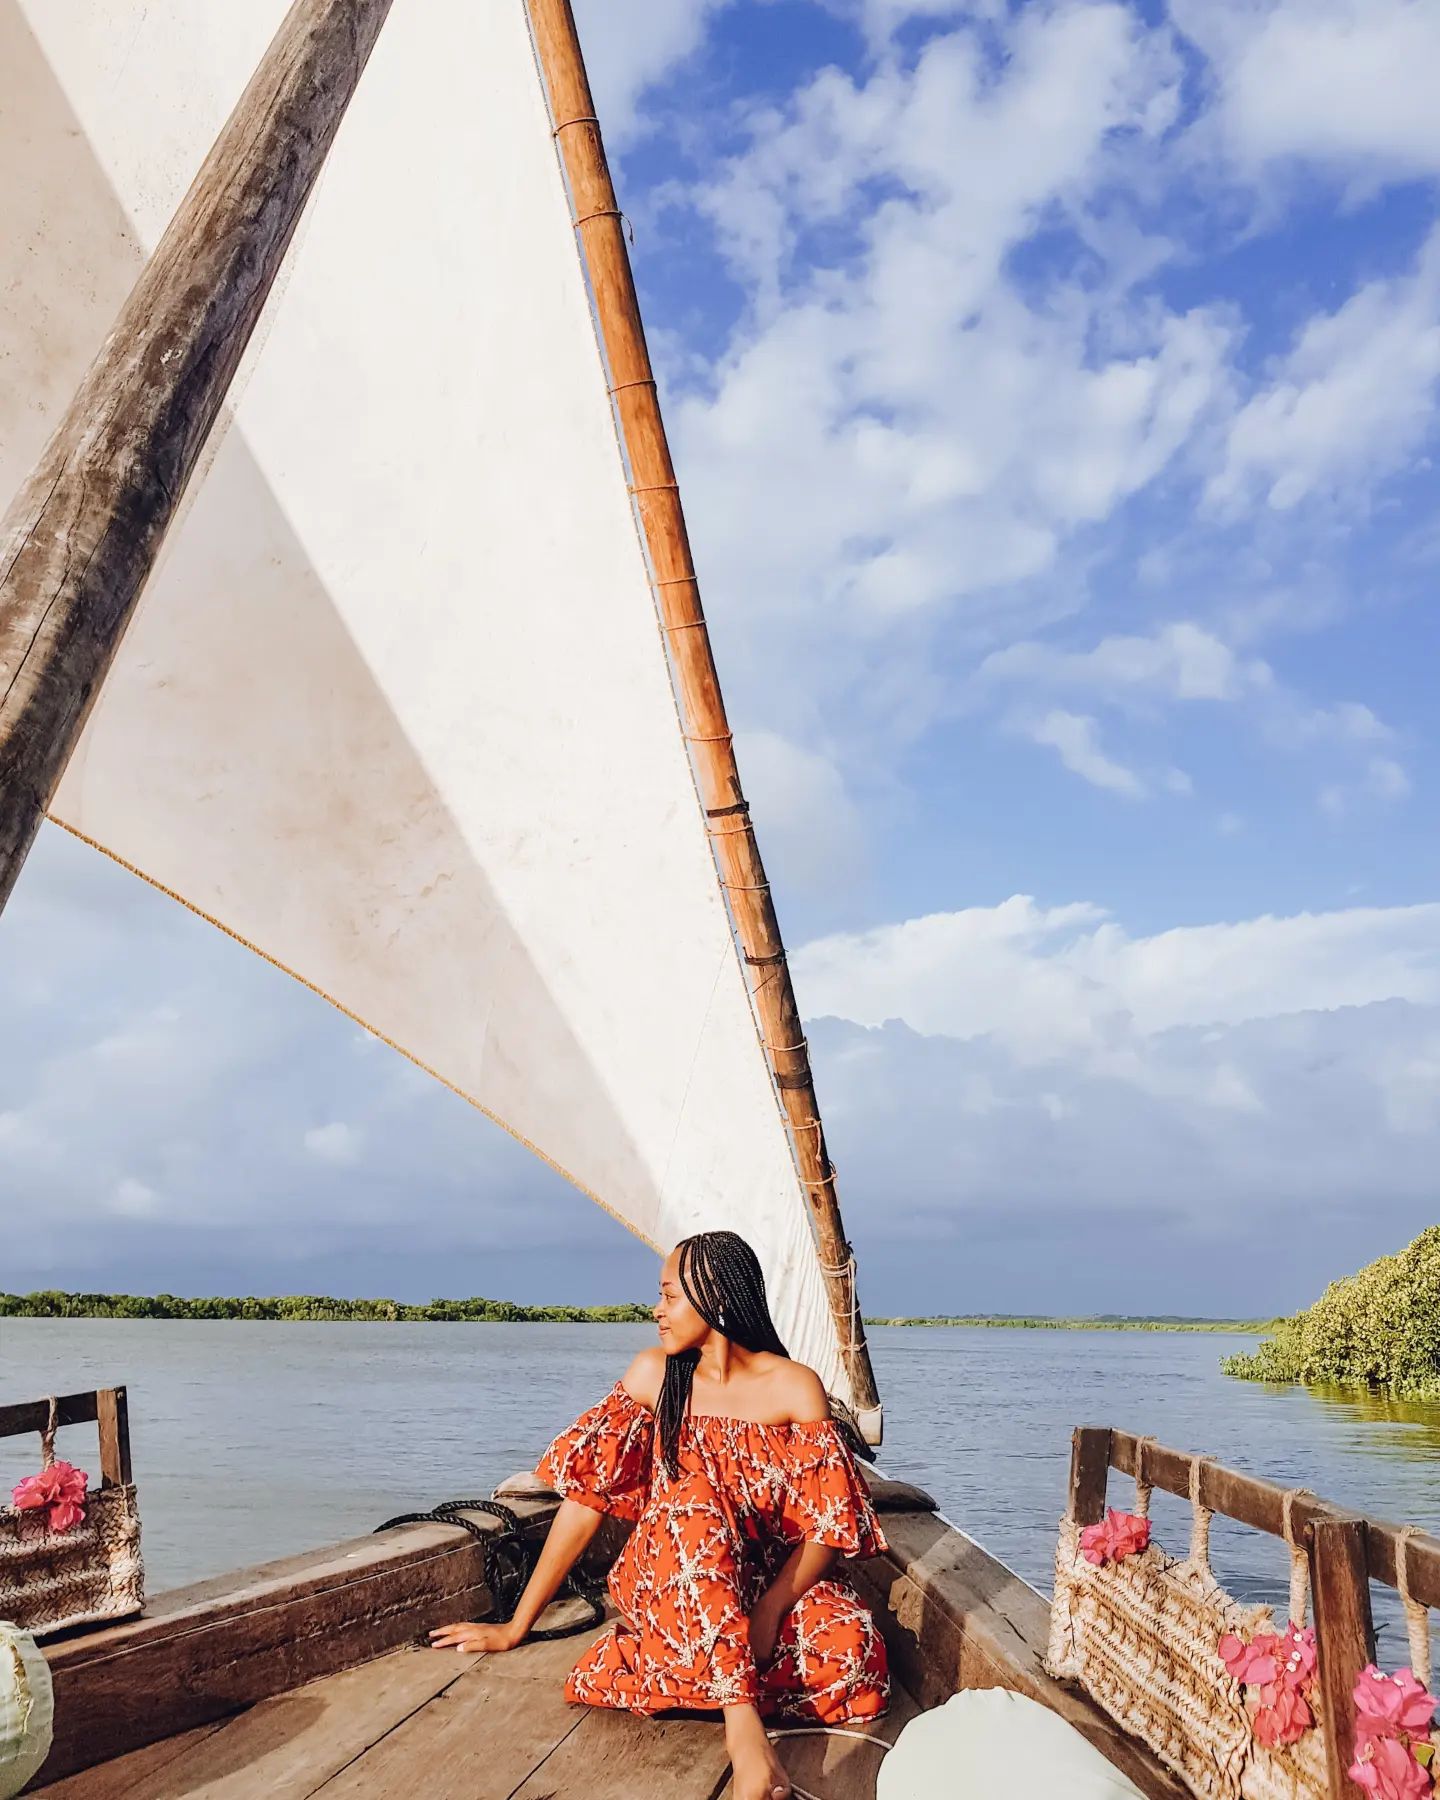 Me 🤝🏼 posting pictures from trips I took years ago!😌⁣
⁣
Happy almost first anniversary to this photo from a trip to Lamu. I wrote a pretty comprehensive guide about this trip and our time on the Island. Check it out if you plan to visit and let me know what you think!